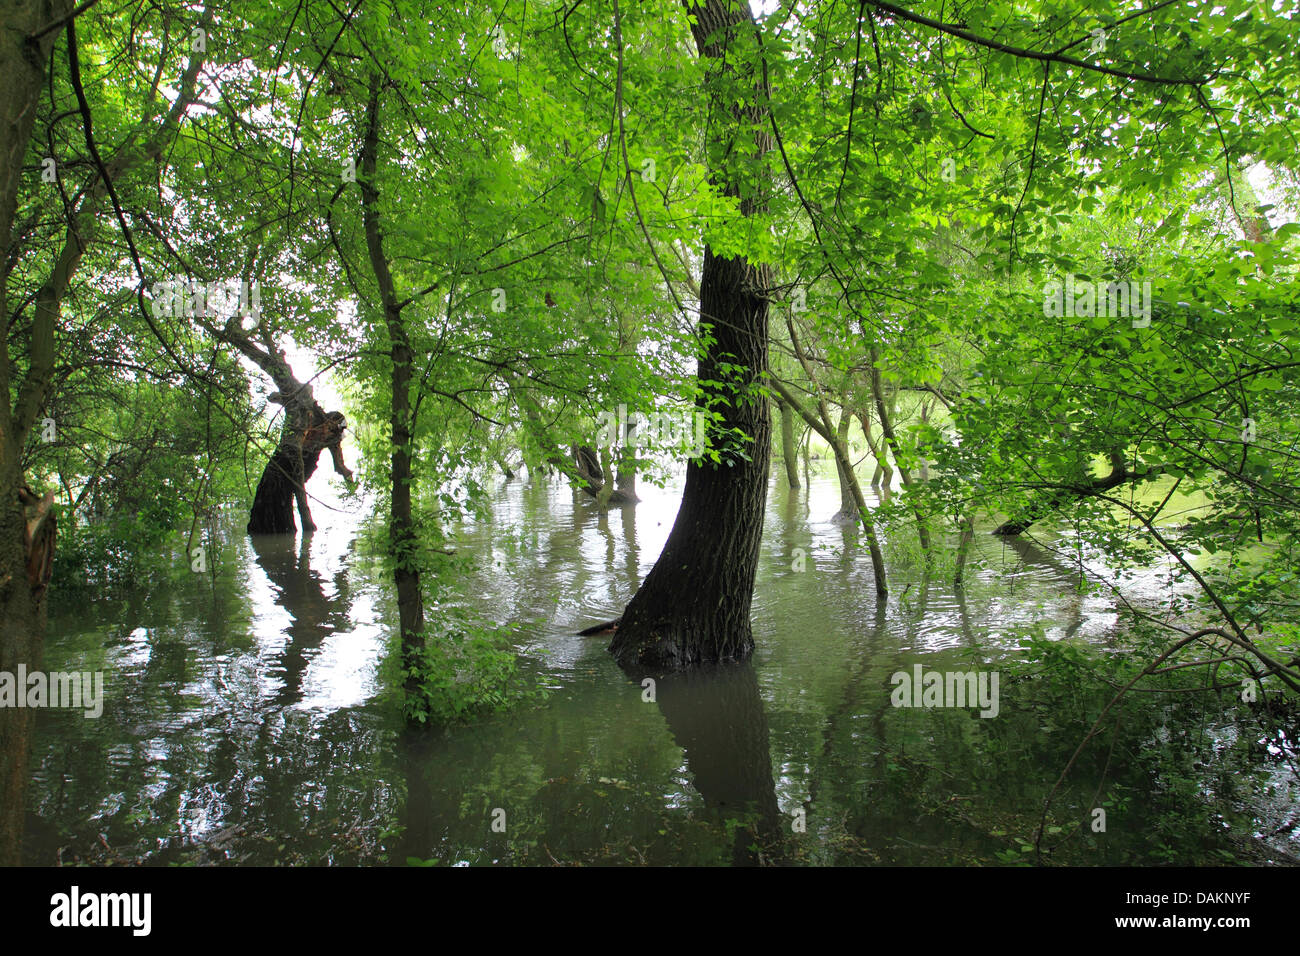 floodplain forest in summer, flooded, Germany Stock Photo